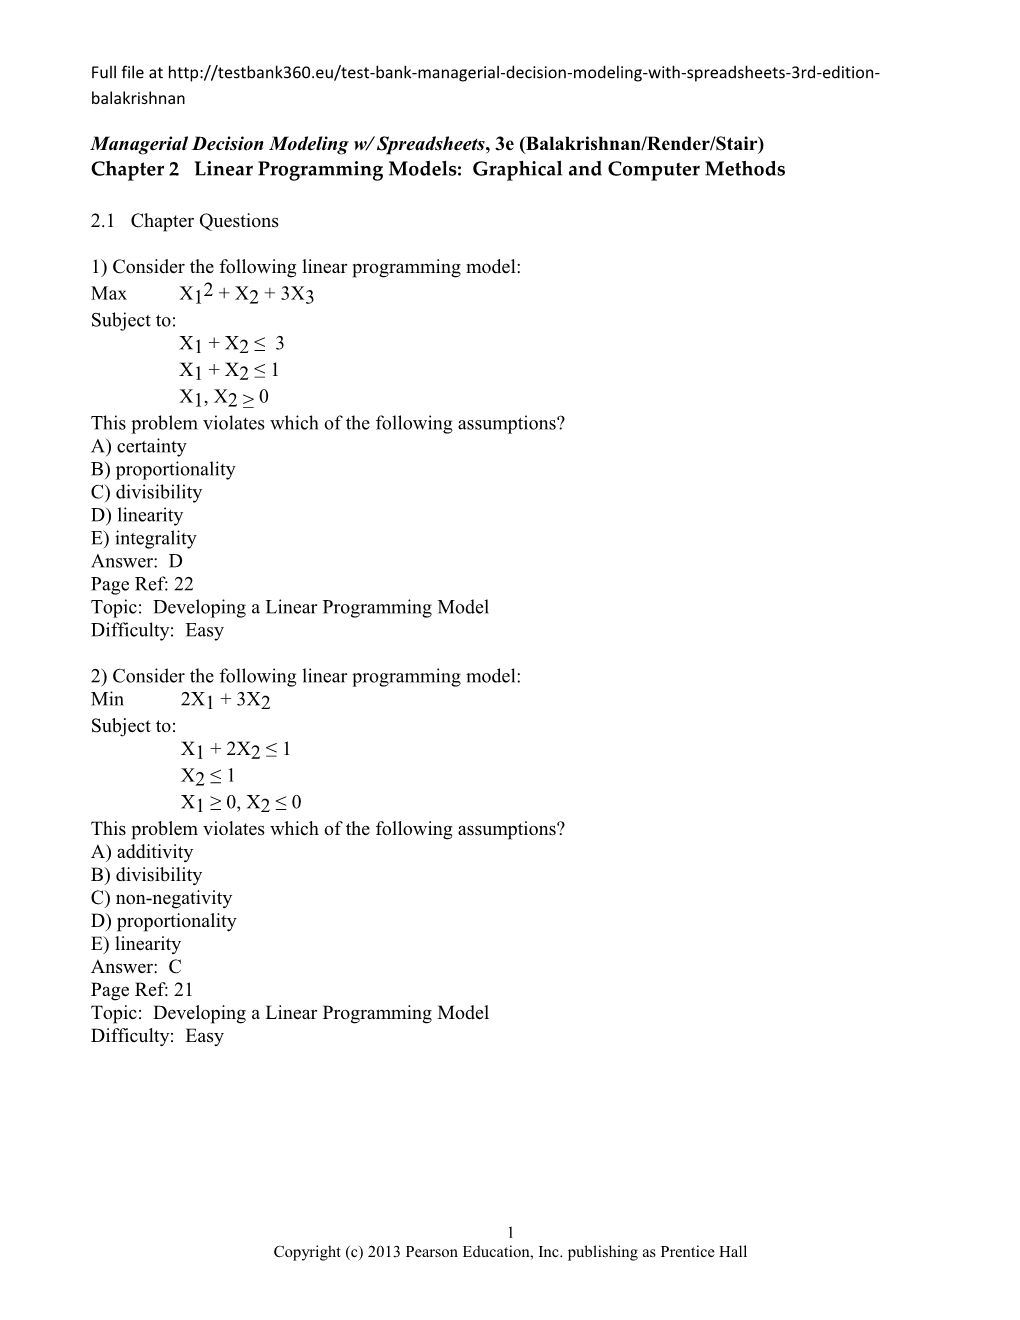 Chapter 2 Linear Programming Models: Graphical and Computer Methods